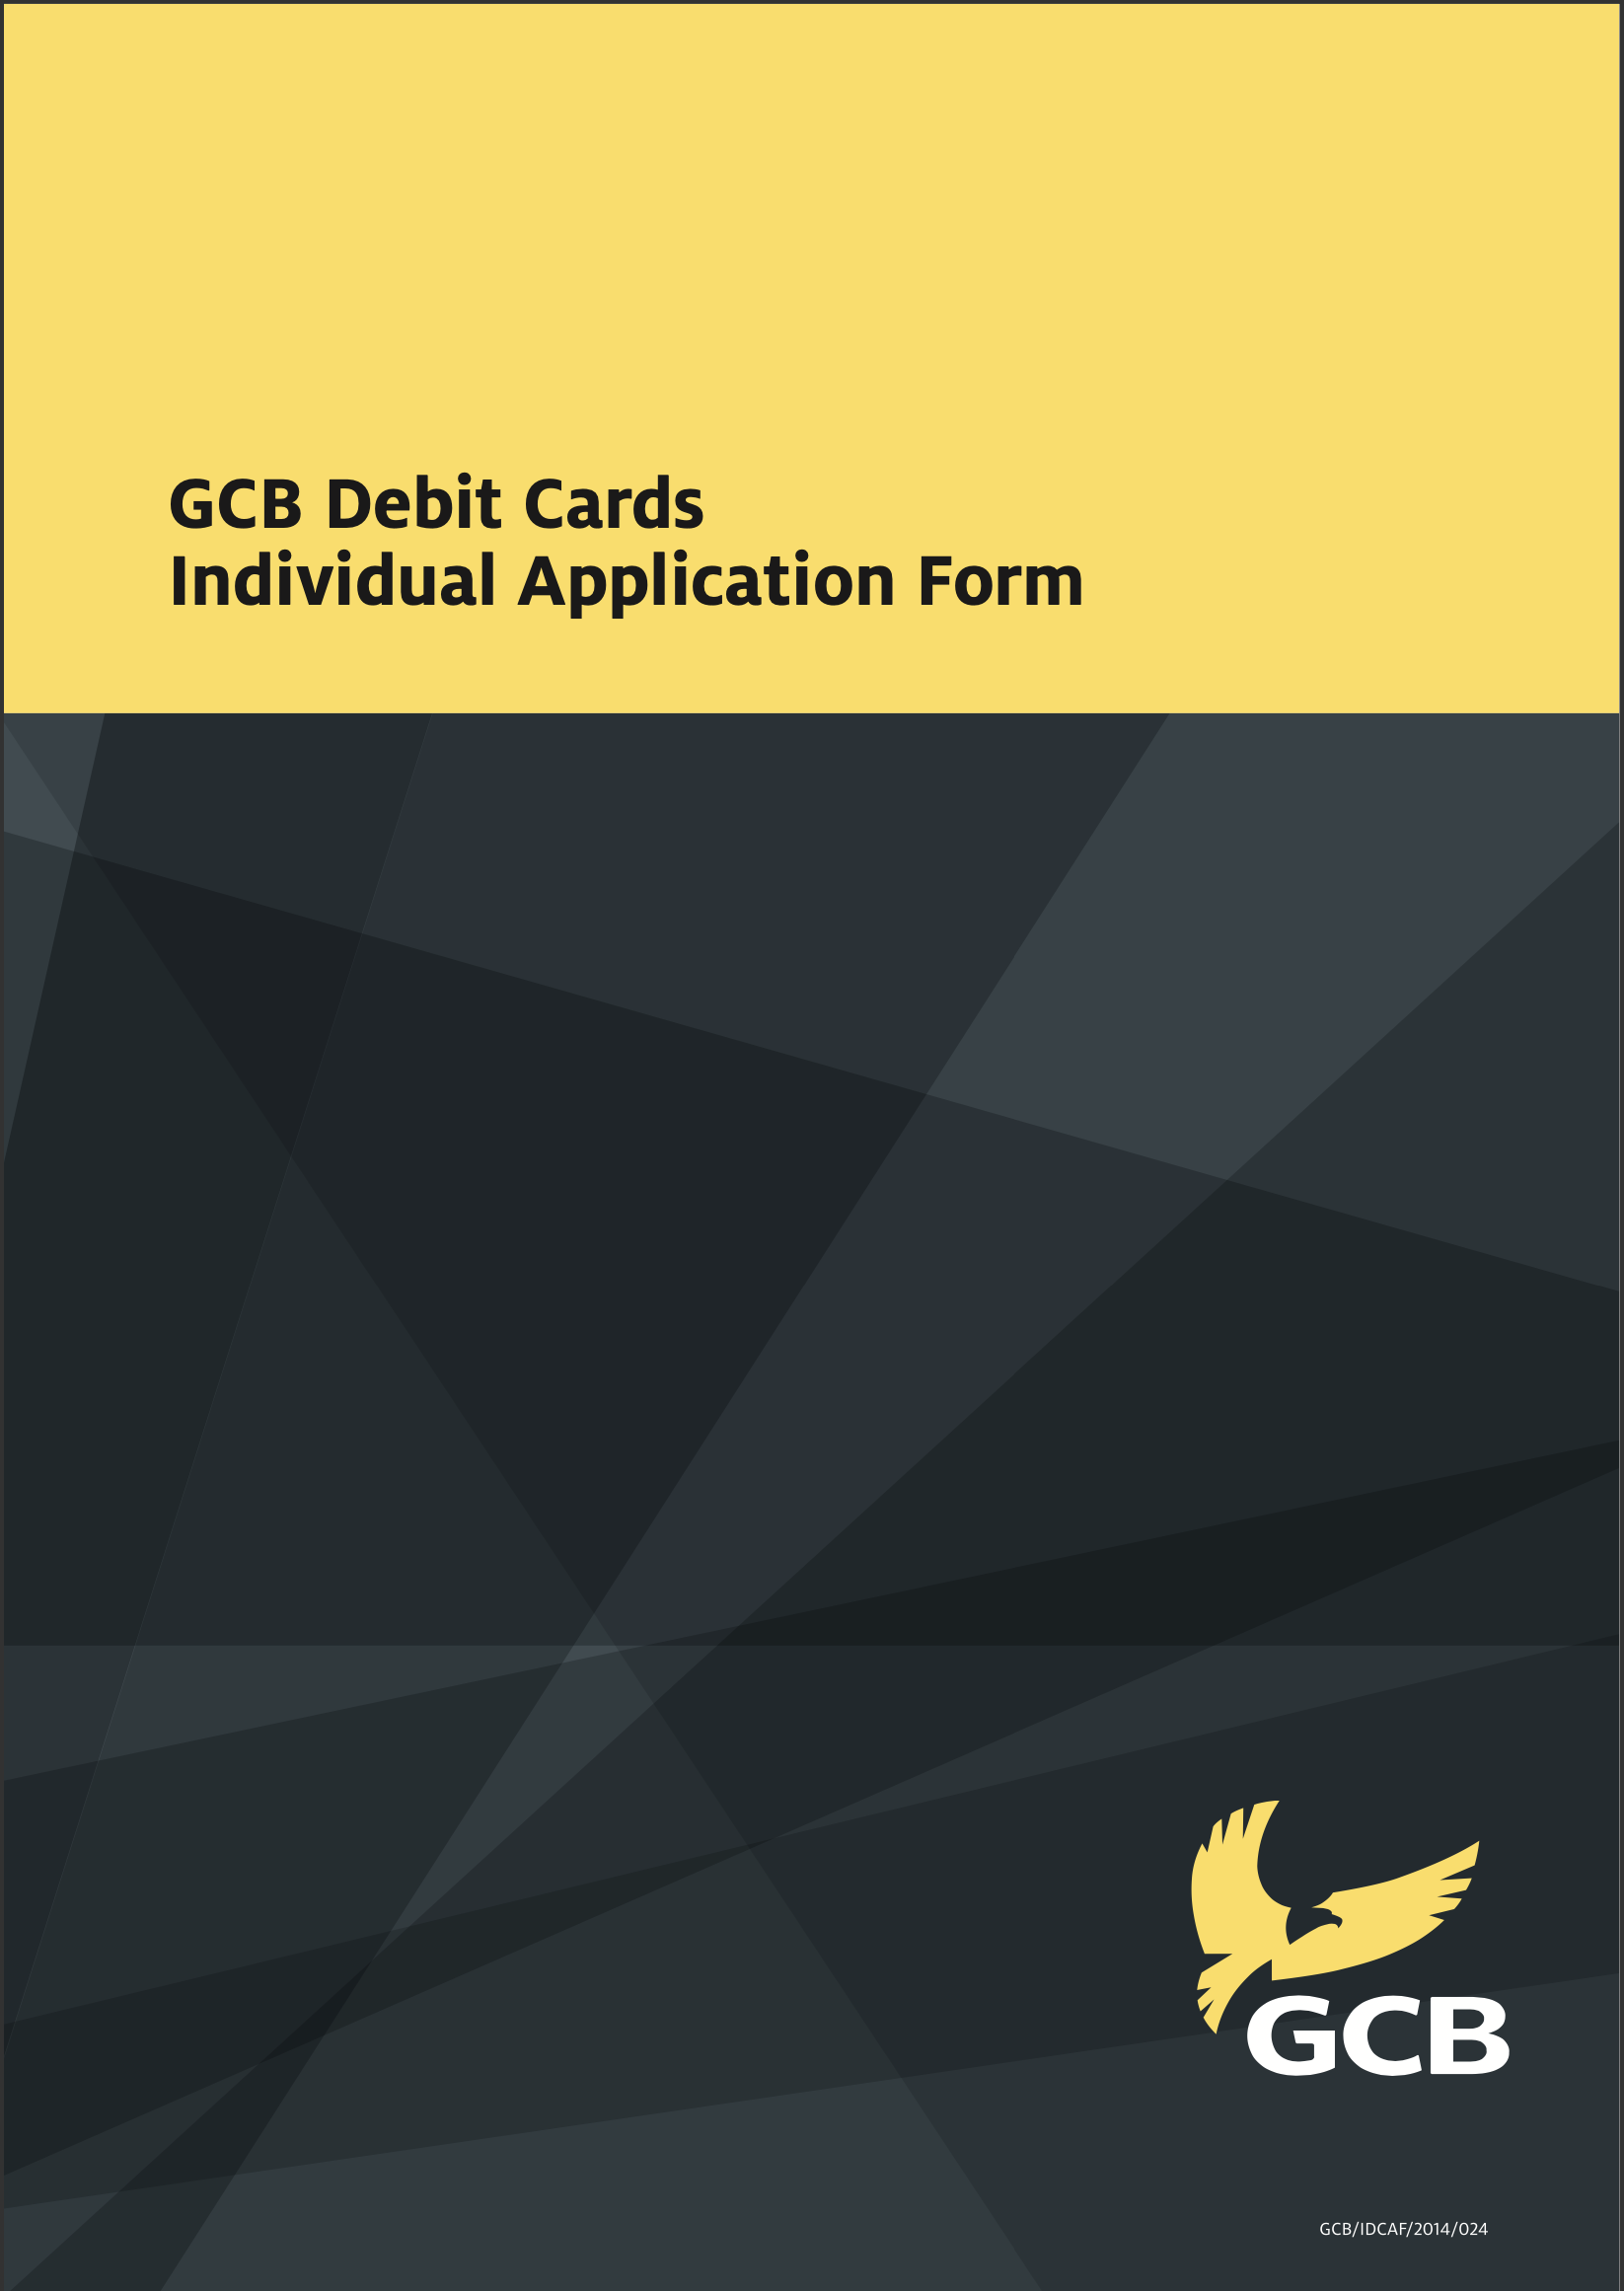 GCB Debit Cards Individual Application Form Revised